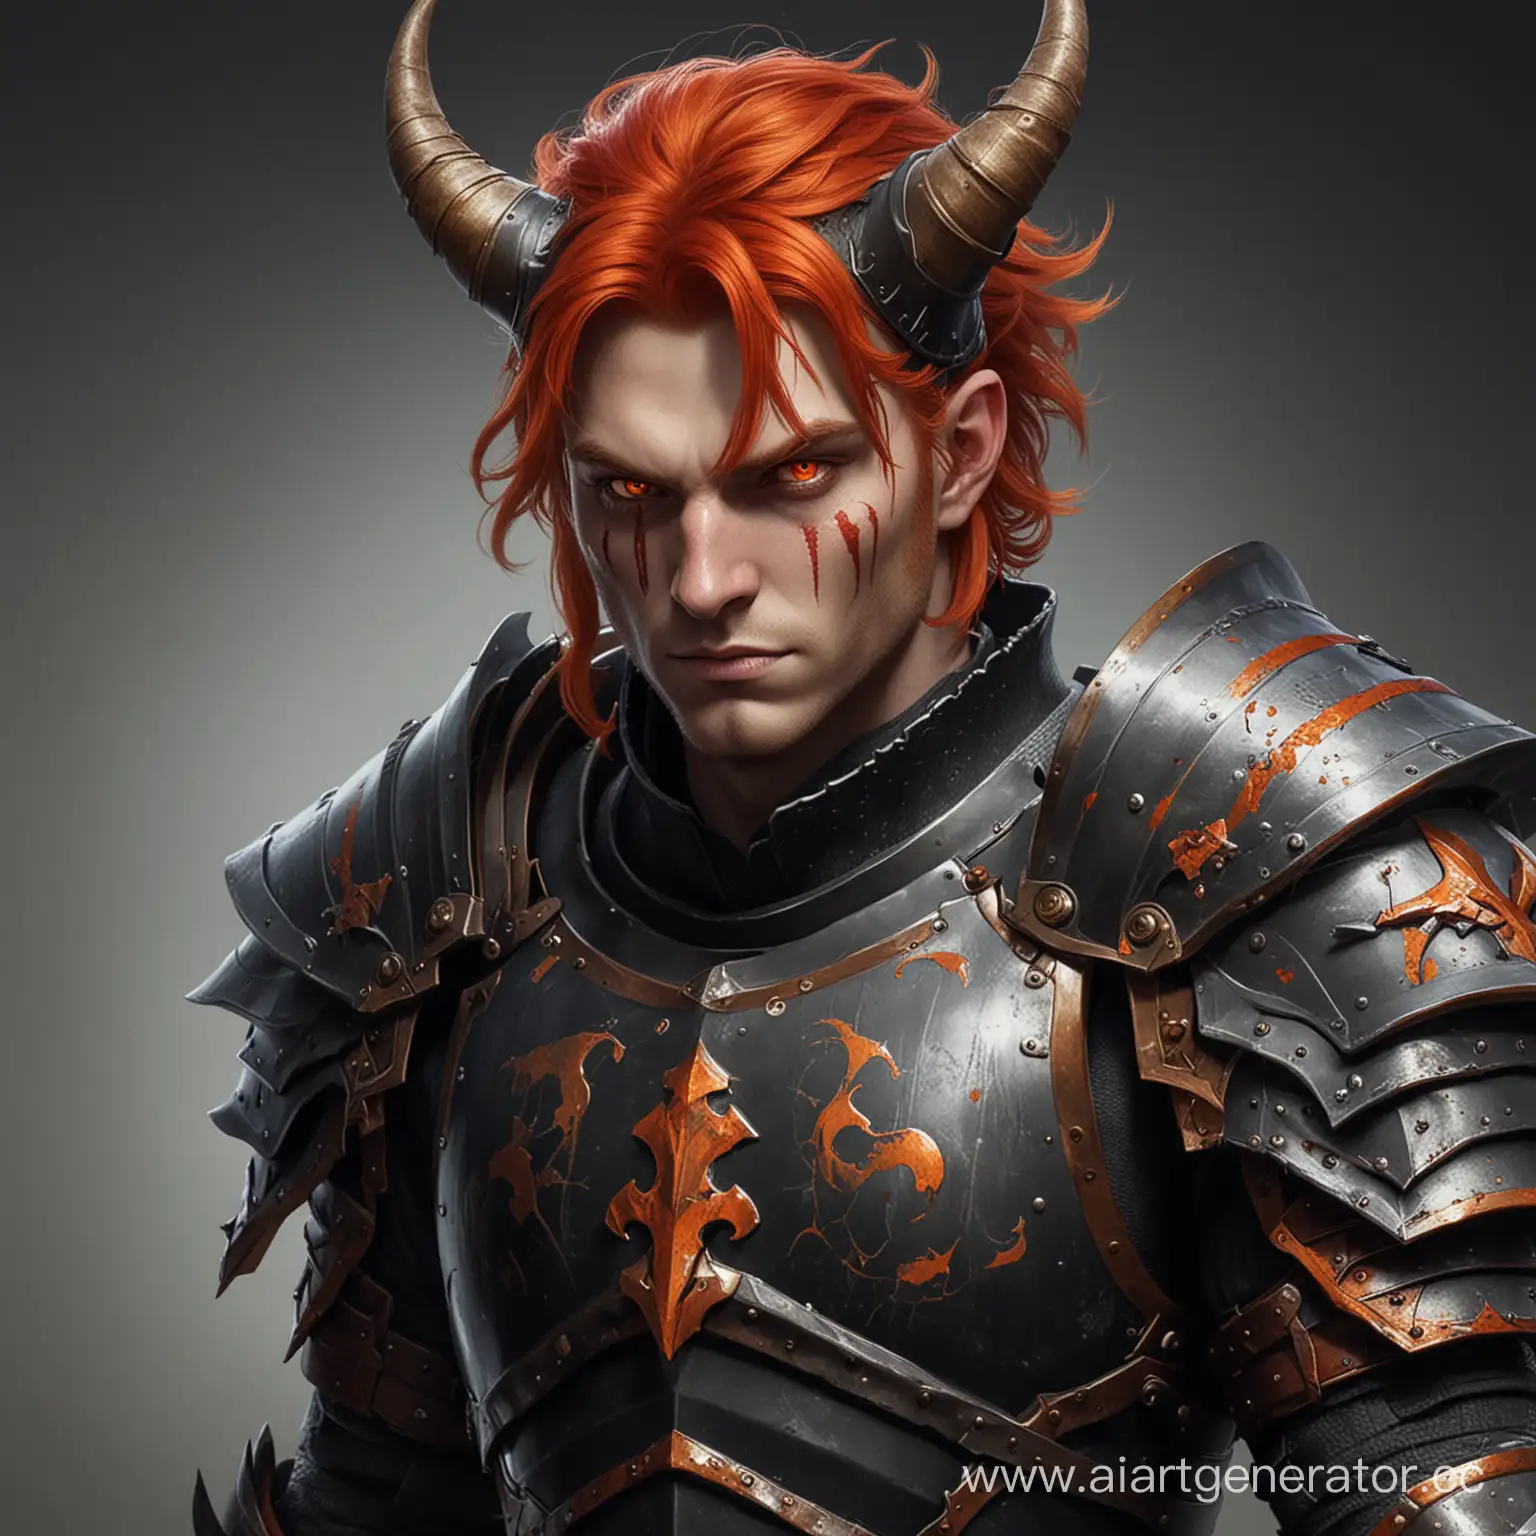 CrimsonHaired-Knight-in-Fiery-Armor-with-Horns-and-Fiery-Gaze